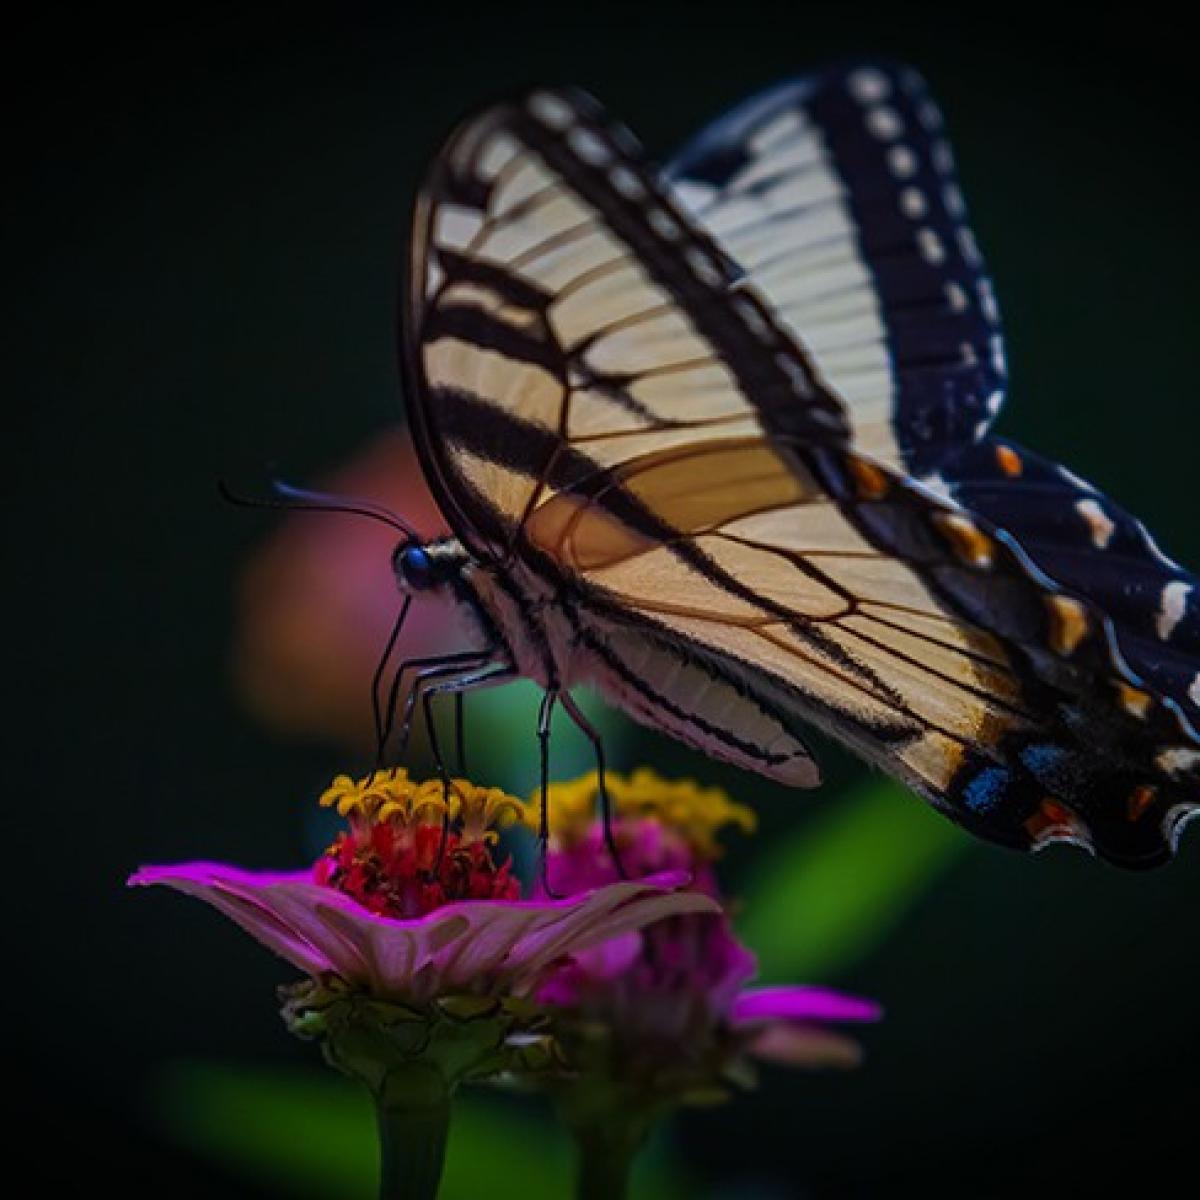 Eastern tiger swallowtail (Papilio glaucus) drinking nectar from zinnia flower.